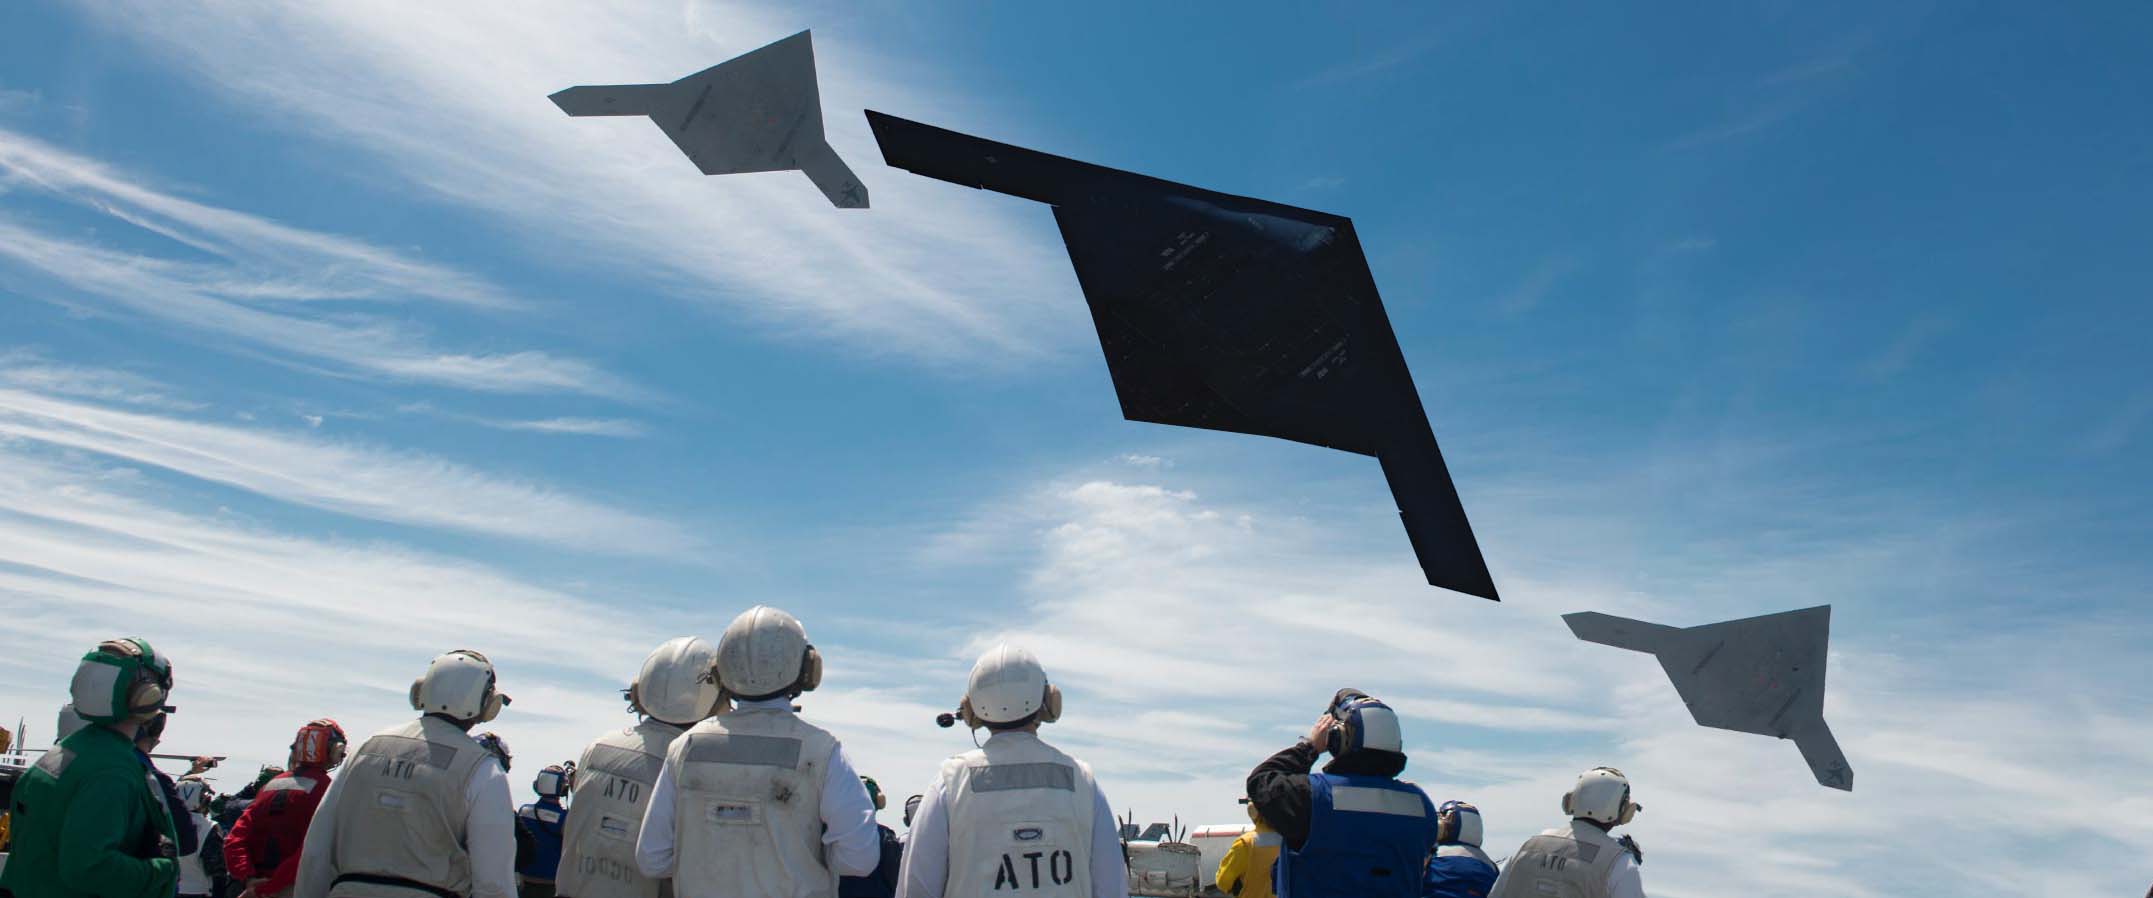 Everything we know about the Air Force's new drone stealth bomber effort - Sandboxx